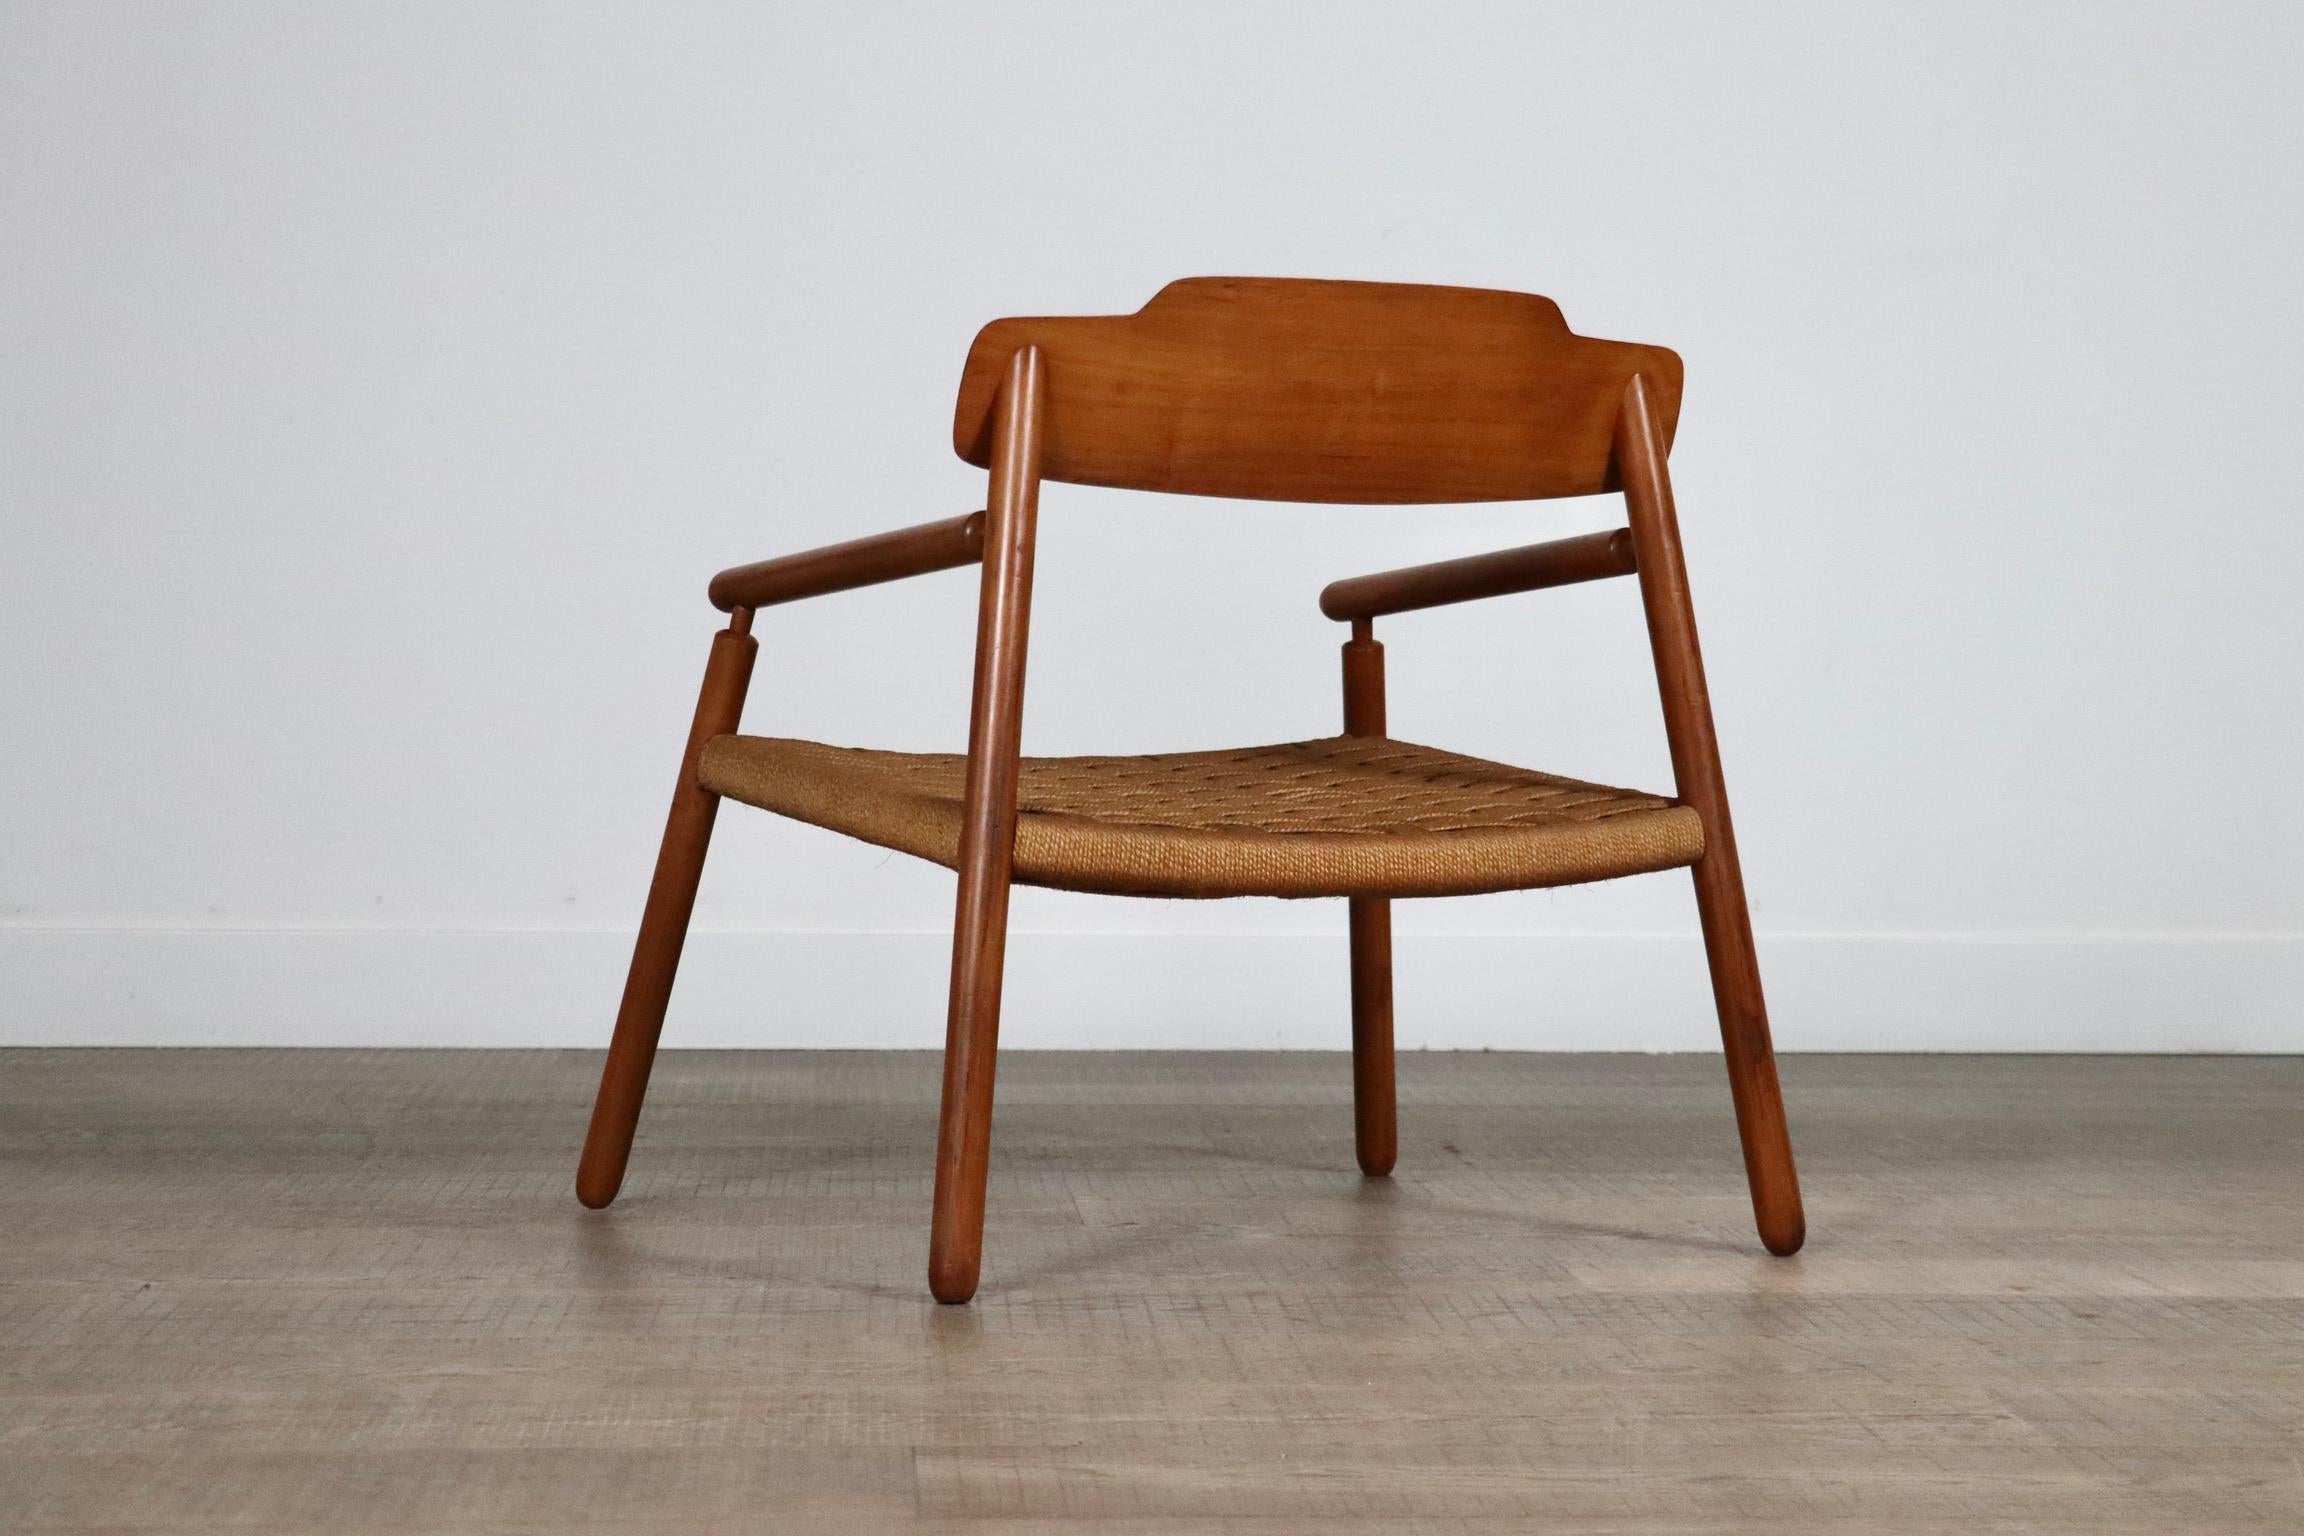 Midcentury Minimalistic Easy Chair In Oak And Papercord, Finland 1950s For Sale 4